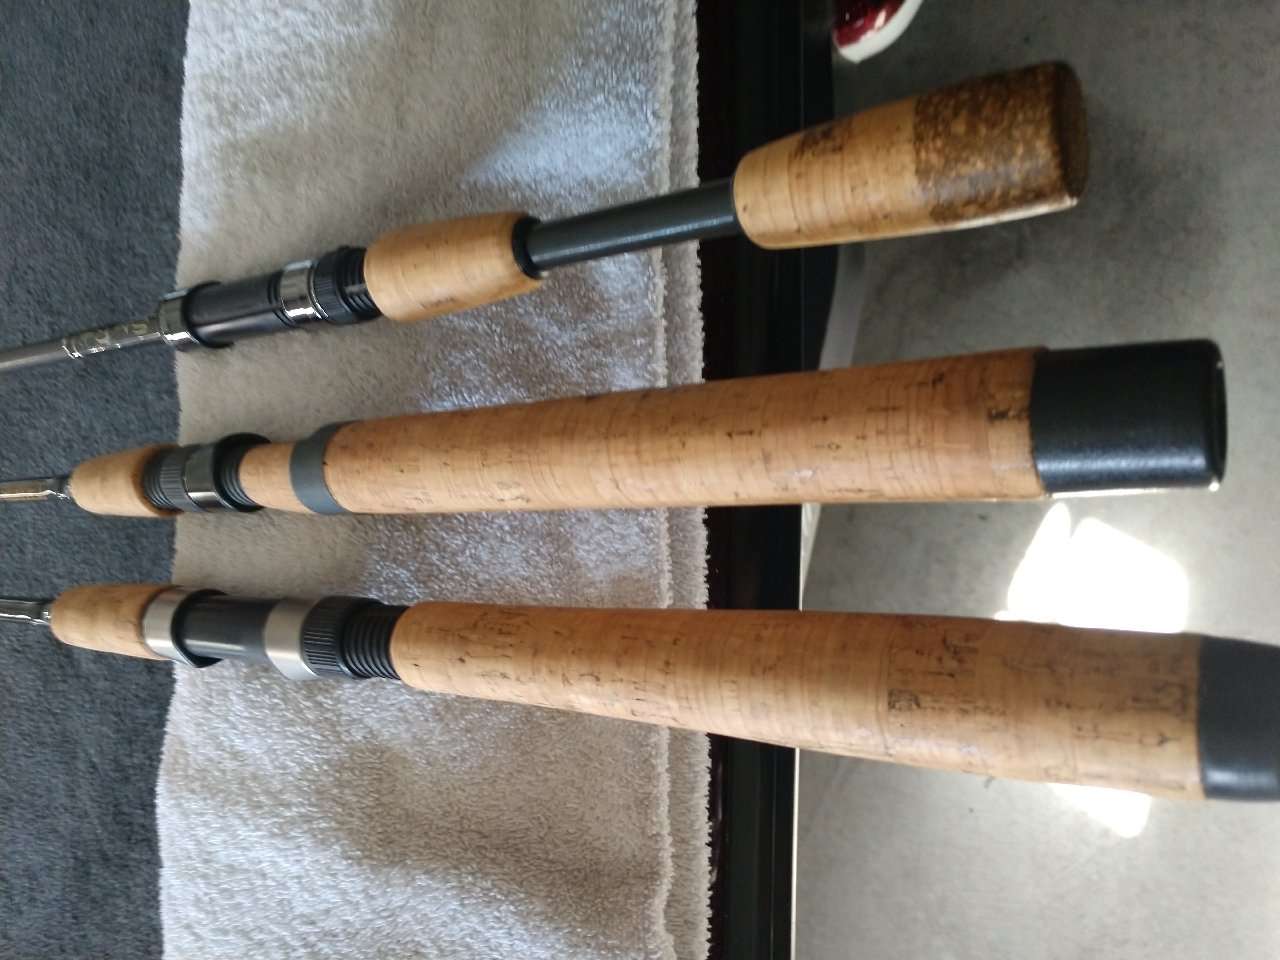 Pt 5 - Modge podge to seal a refinished cork fishing rod handle - how I do  it #fishing #rodbuilding 